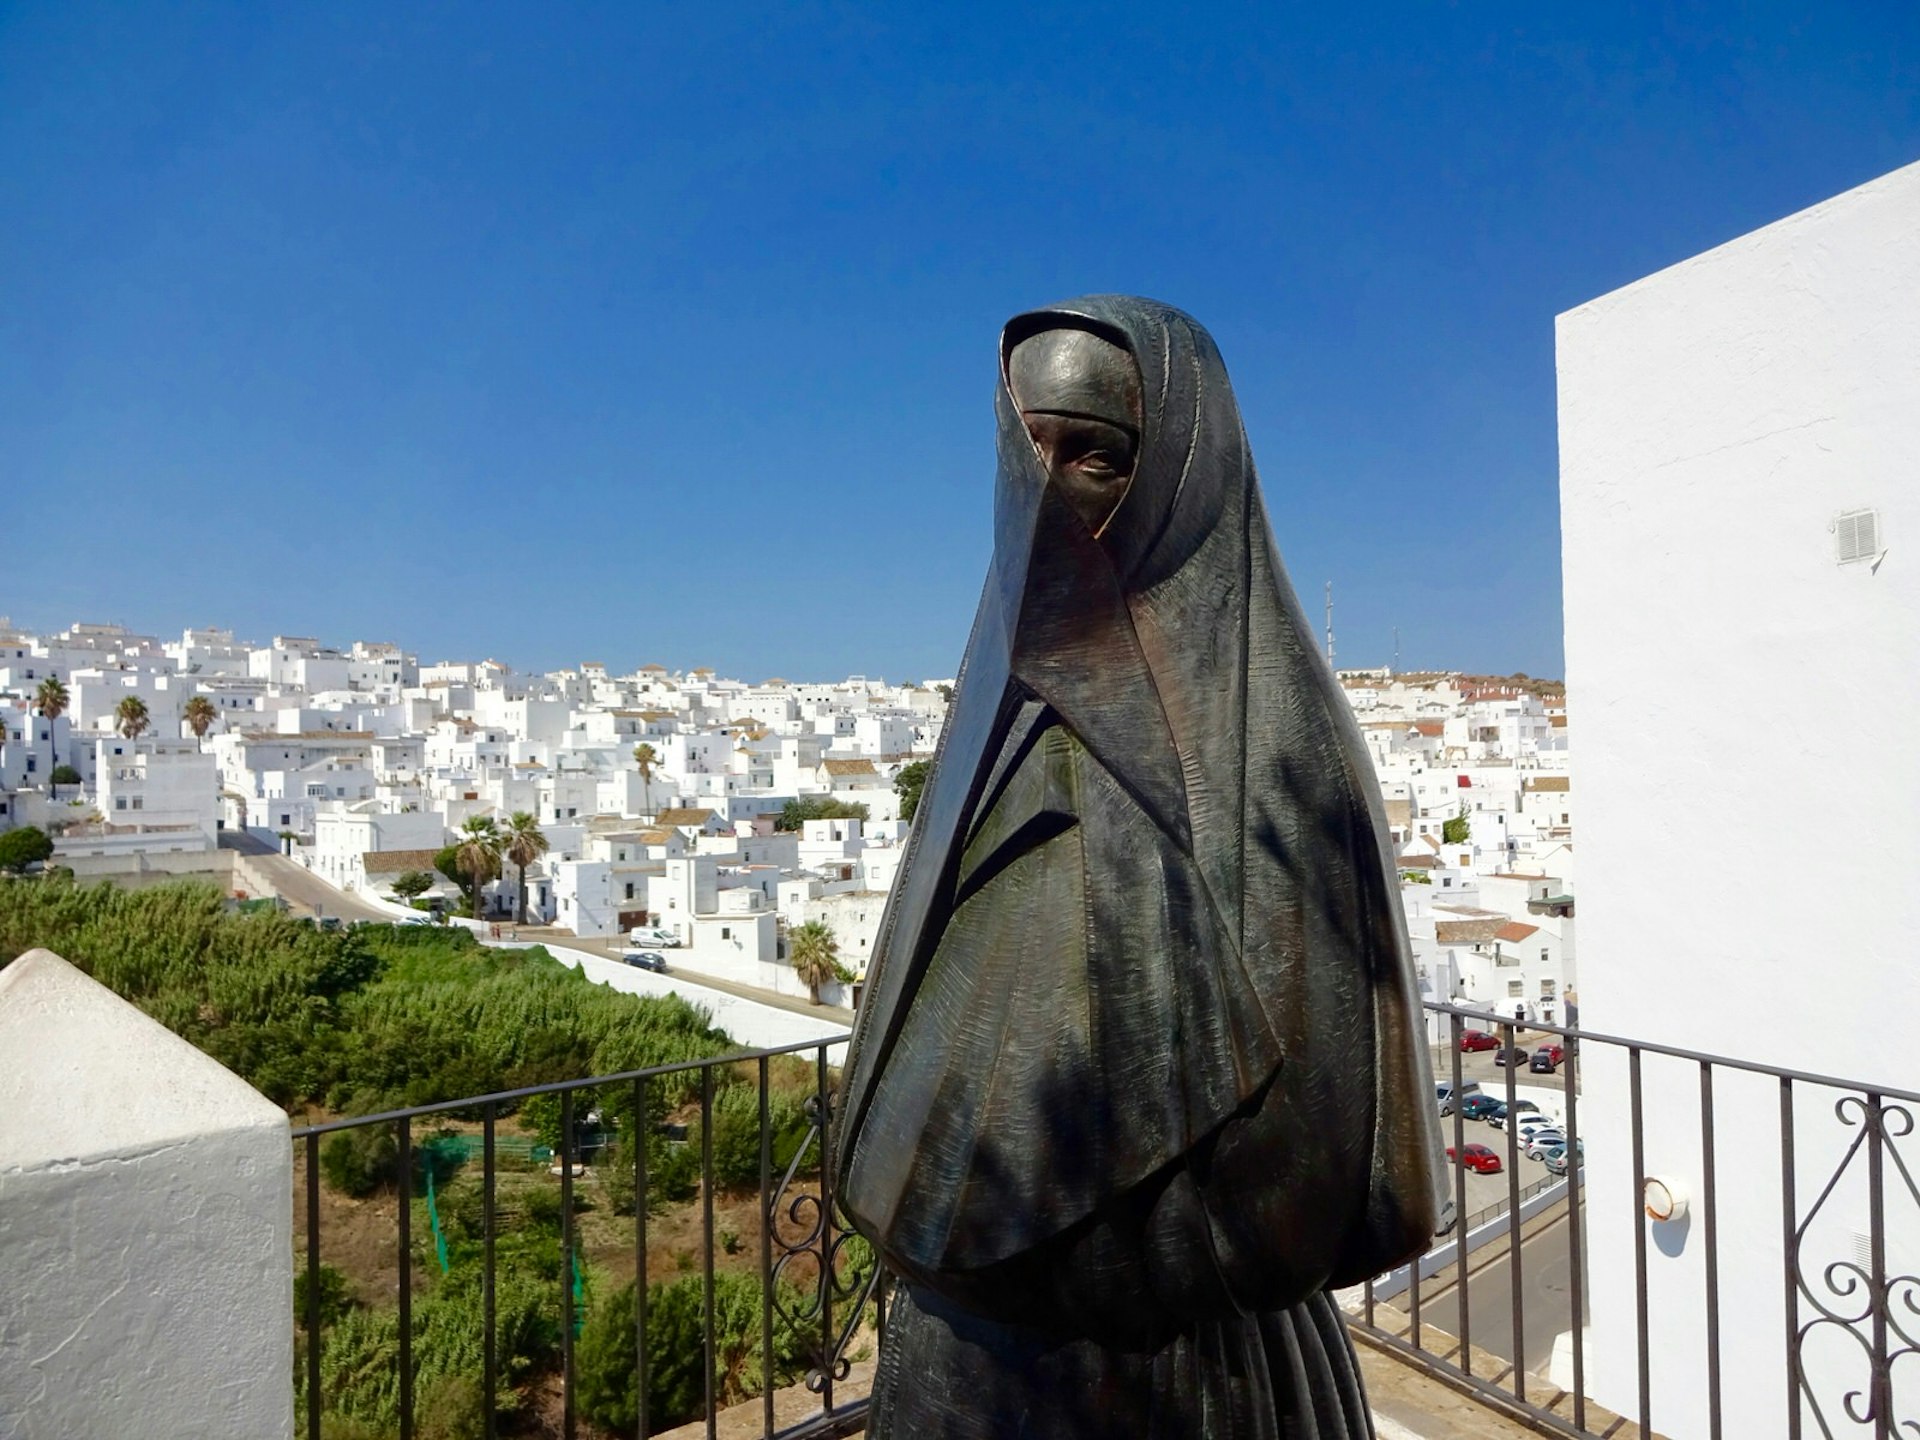 Statue of a cobijada - a Vejer woman dressed in the traditional local dress of a black cloak-like garment covering everything but the right eye - in Vejer's old town